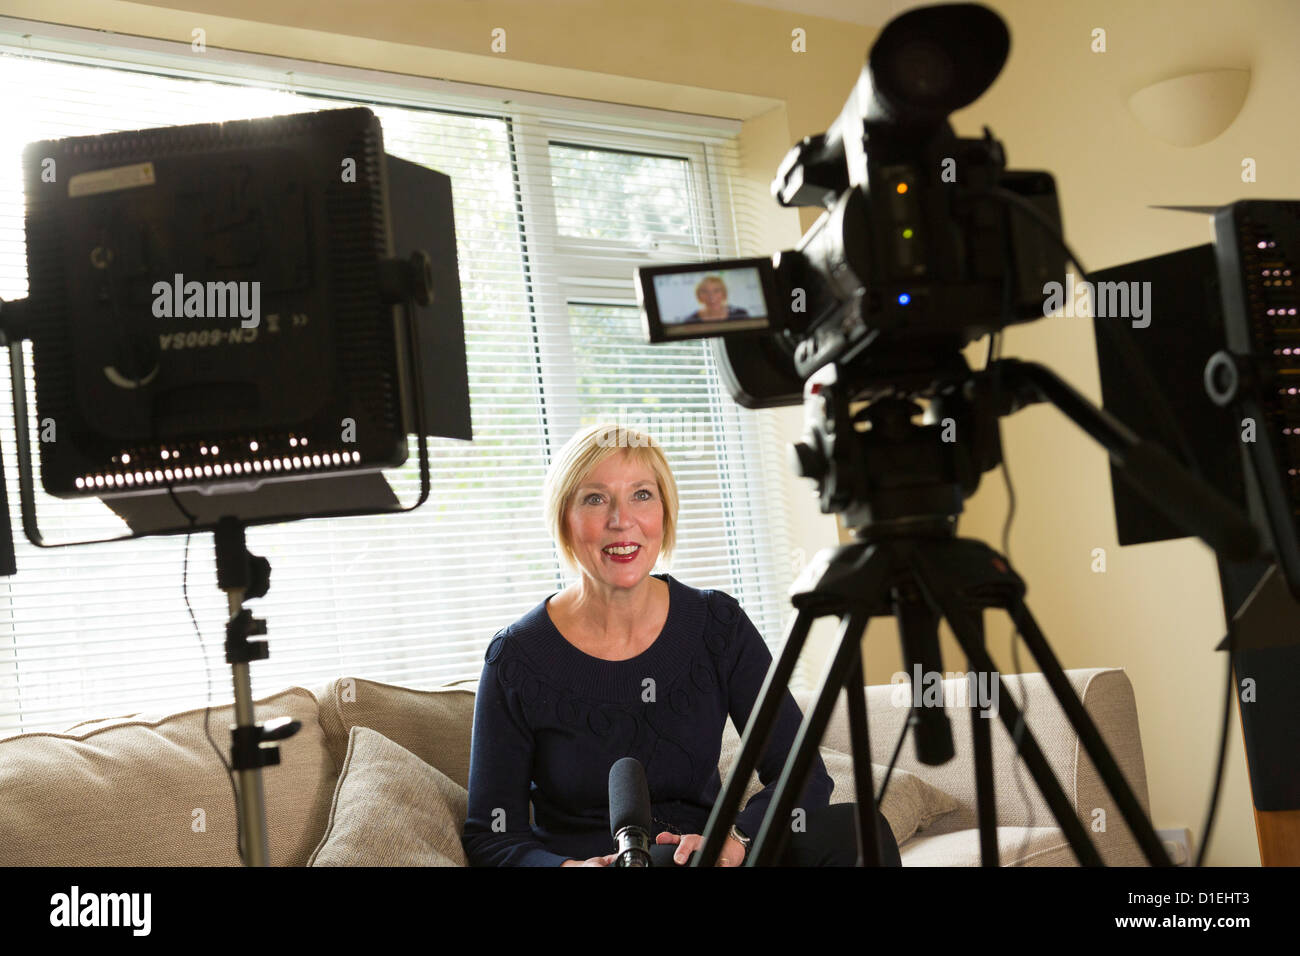 A female presenter in front of a camera for video film production Stock Photo